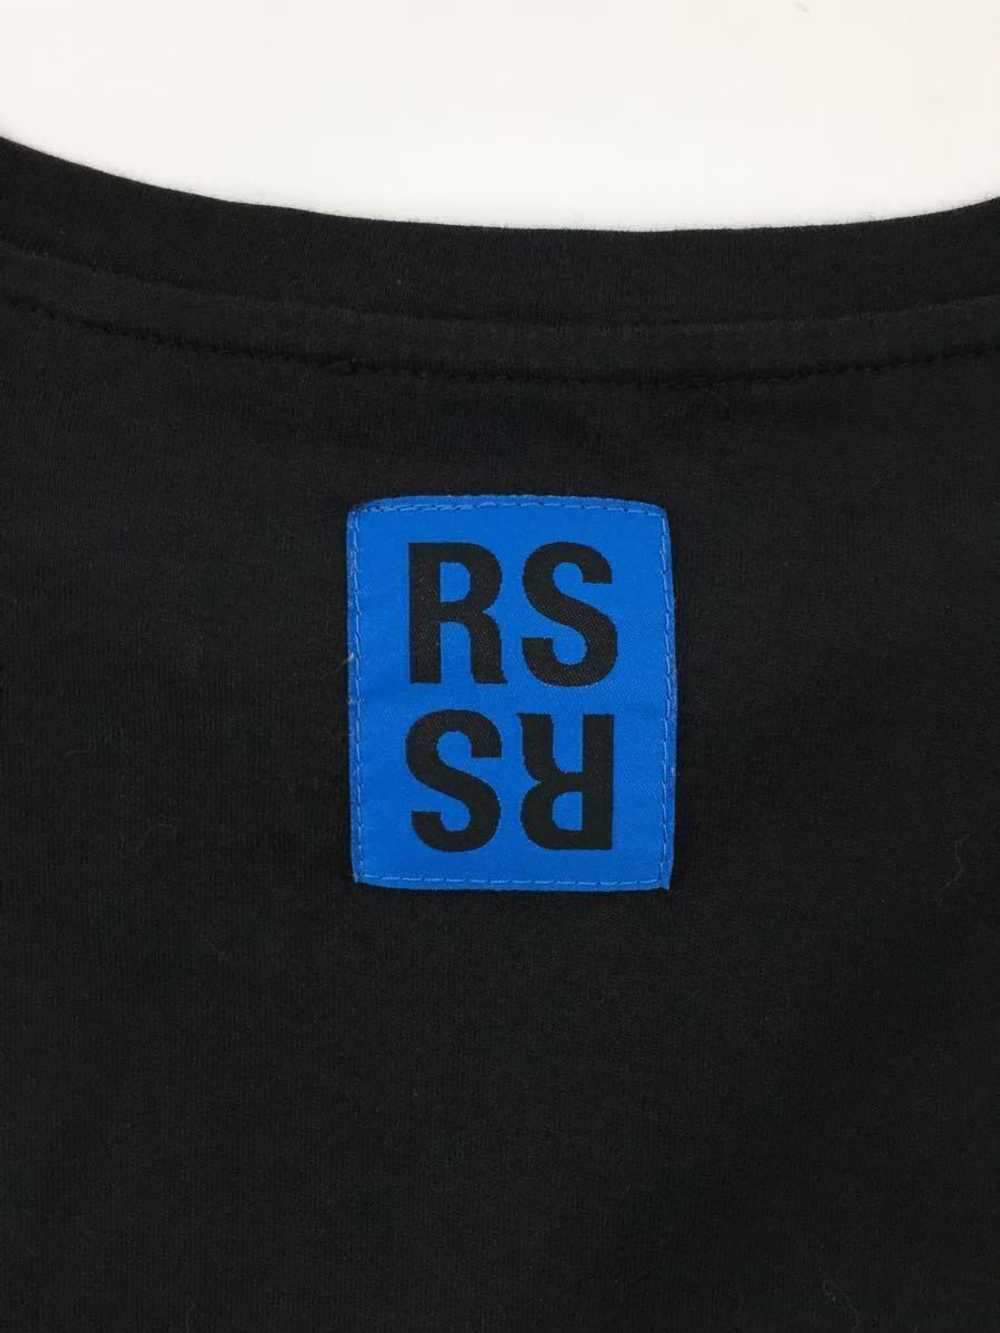 Raf Simons "TO THE ARCHIVES" Tee - image 7